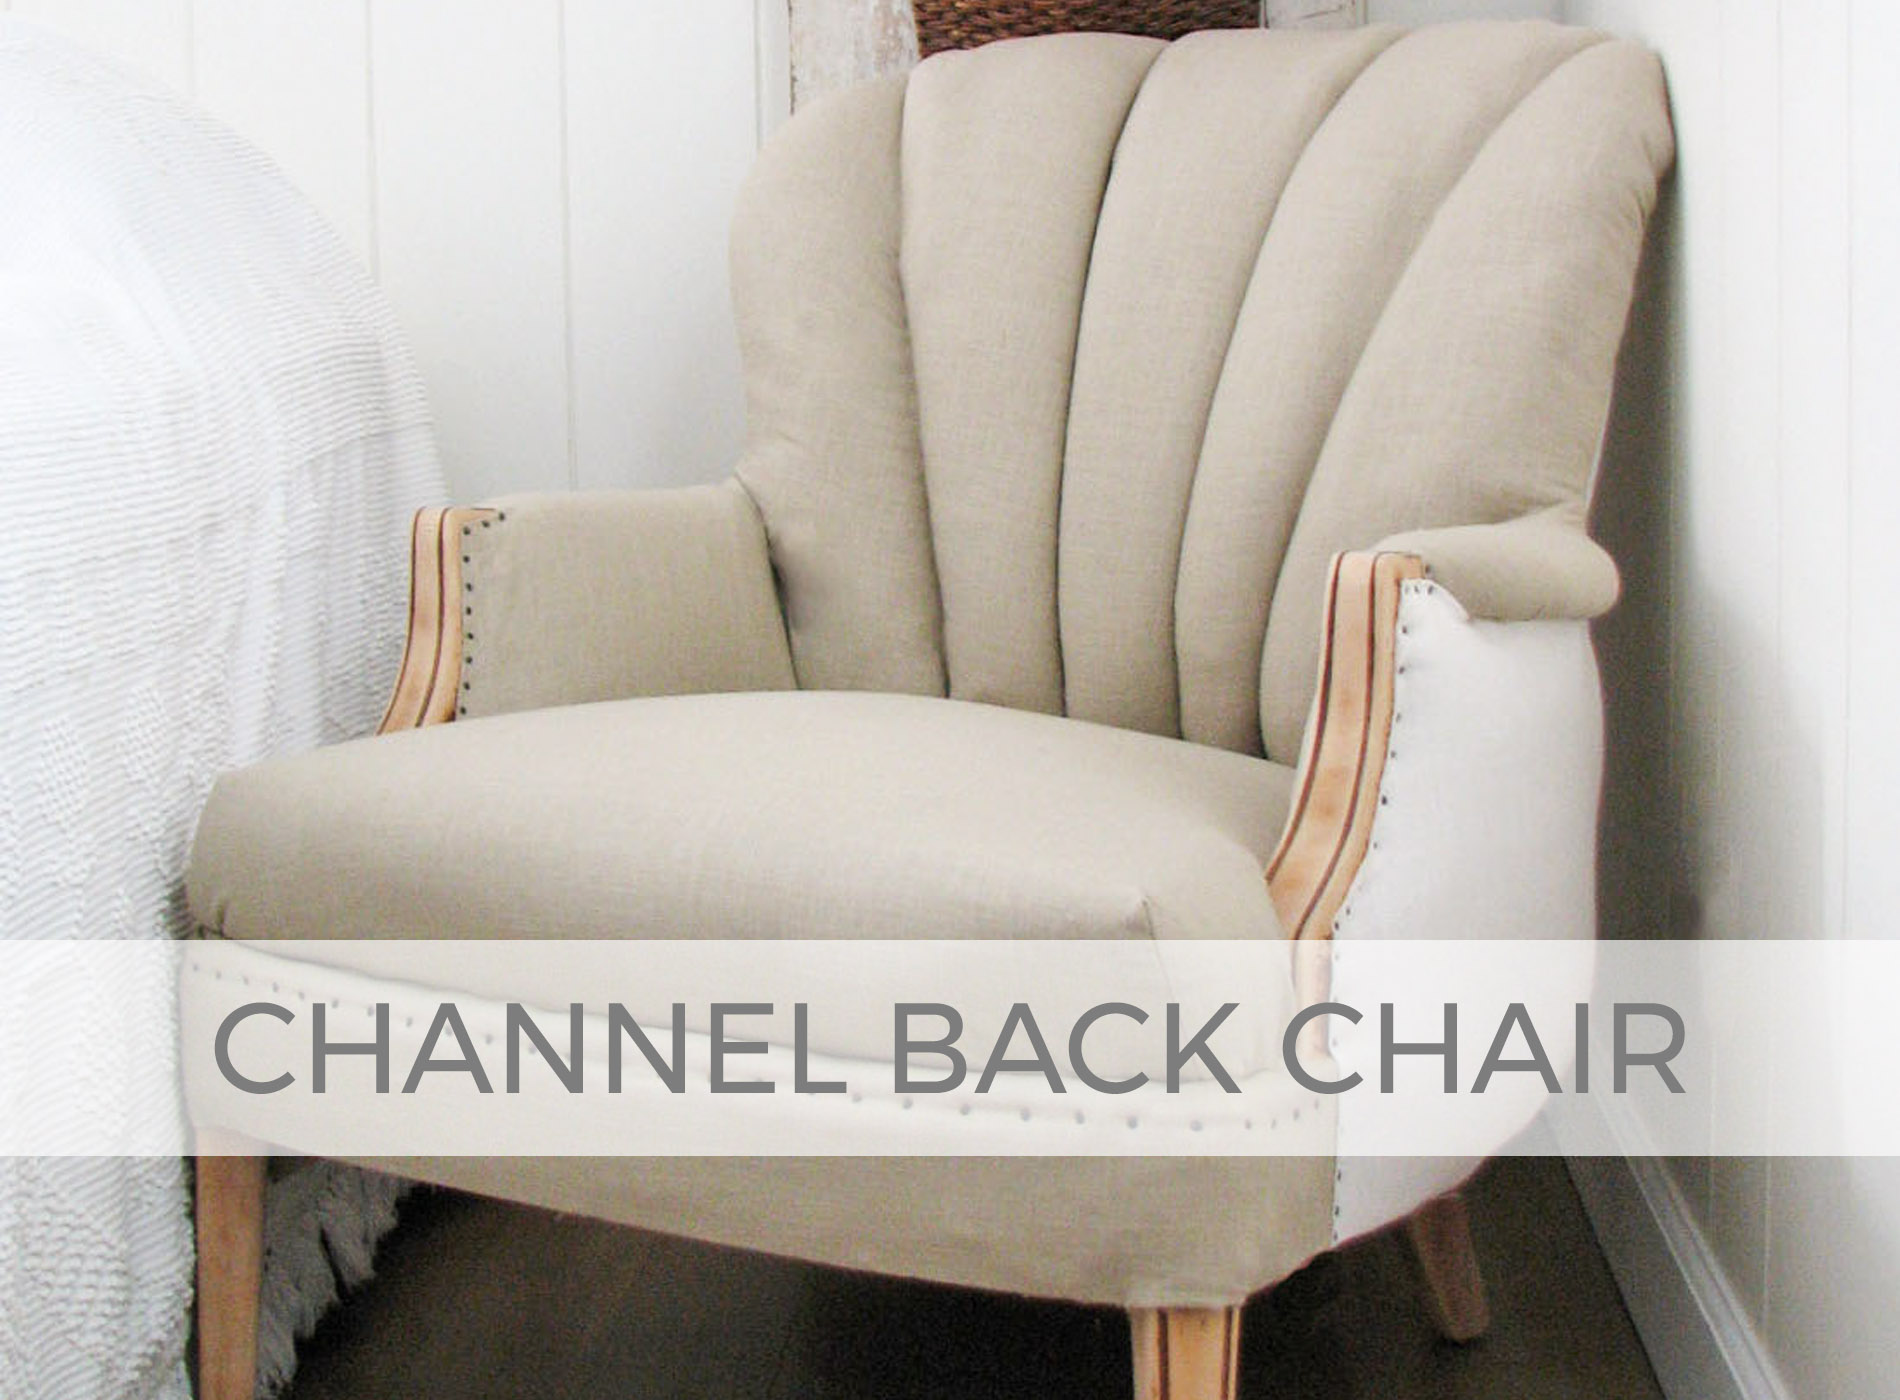 Channel Back Chair Upholstery by Larissa of Prodigal Pieces | prodigalpieces.com #prodigalpieces